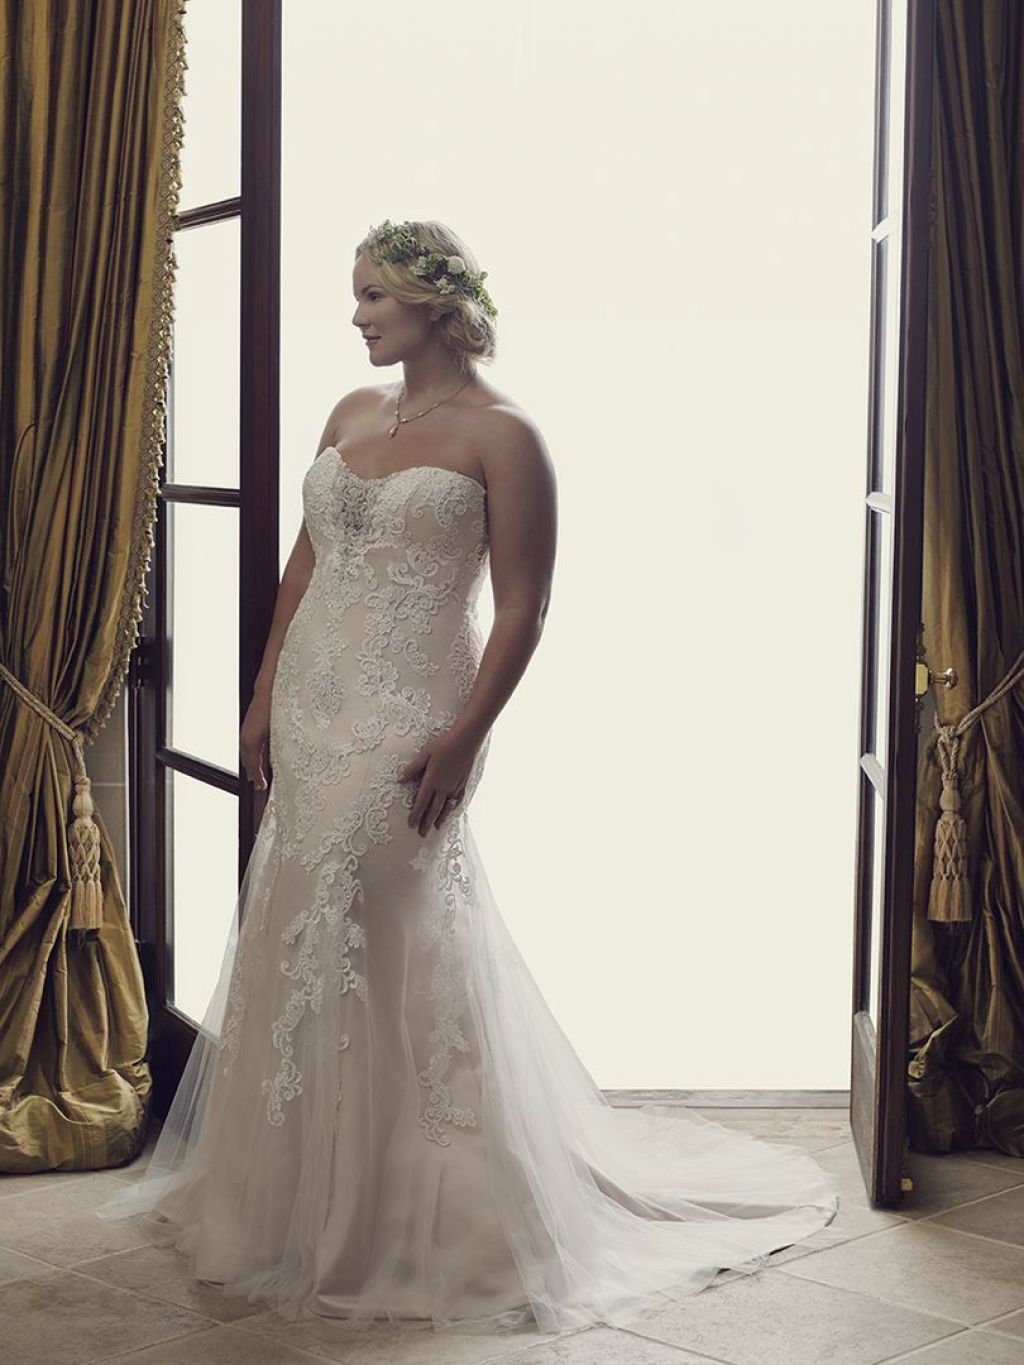 Plus size bride wearing fit-and-flare wedding dress - the Casablanca Lotus gown